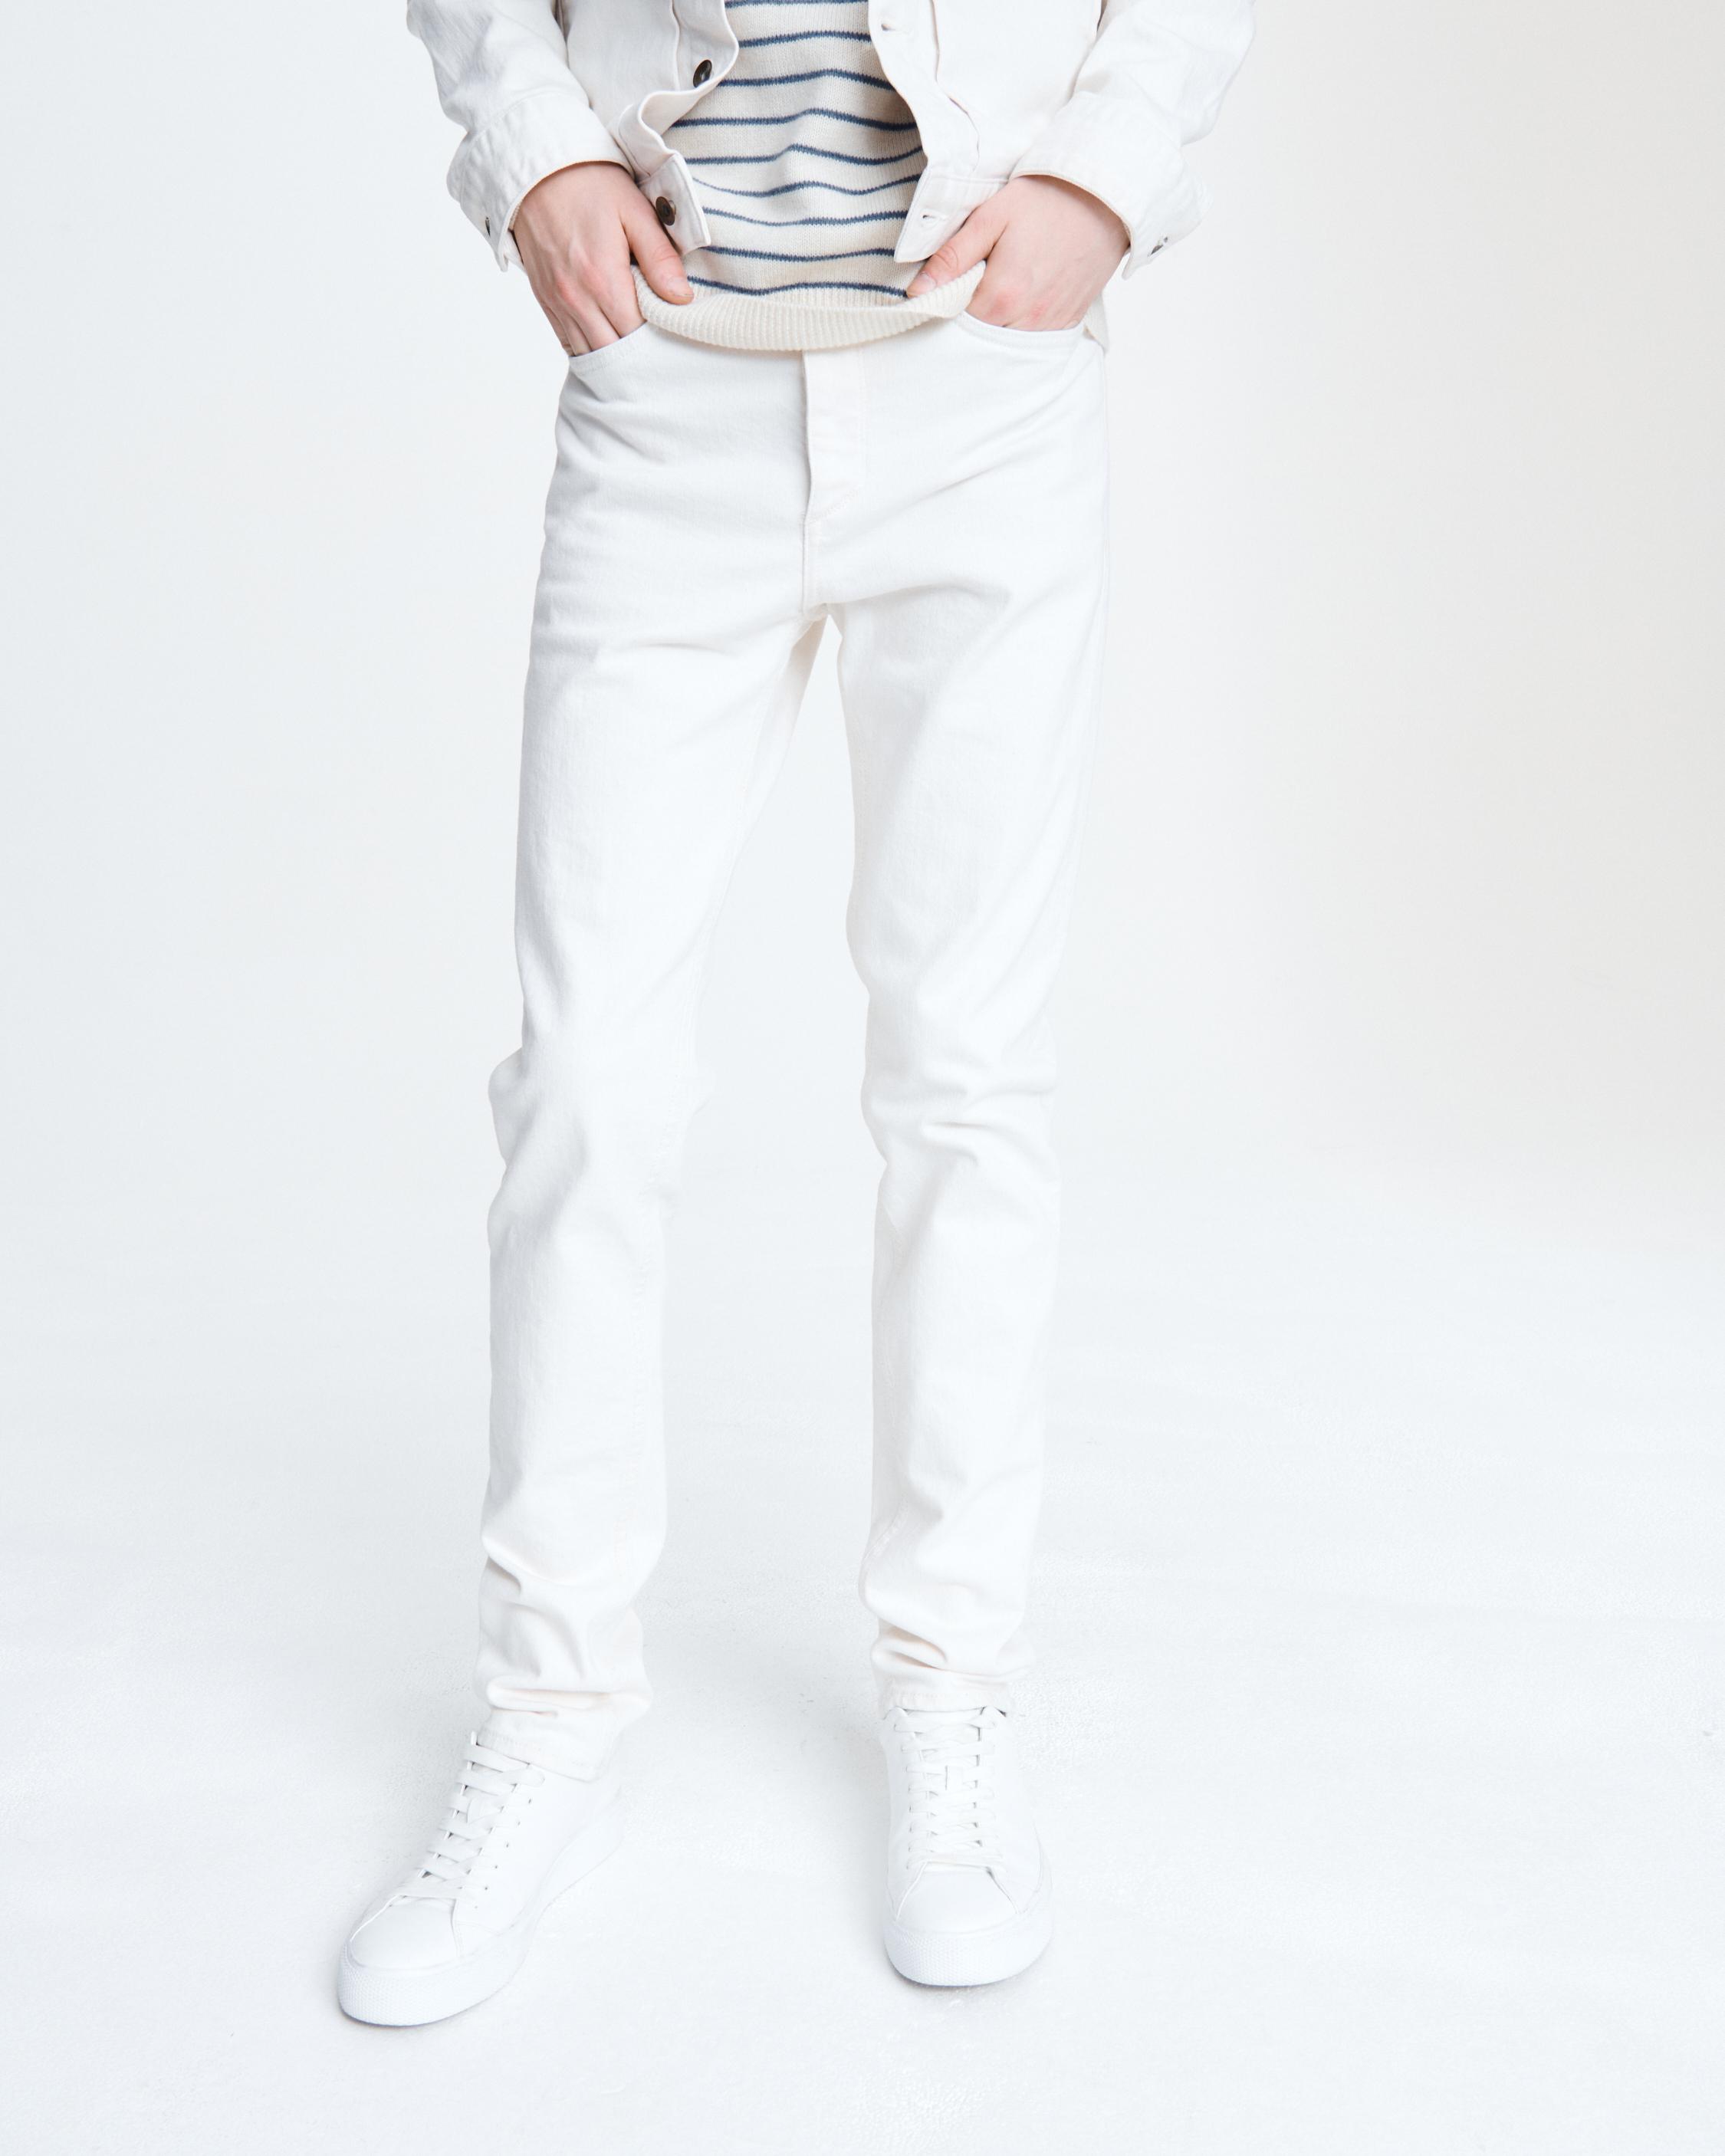 The Best White Jeans for Men Will Solve Your White Jeans Worries